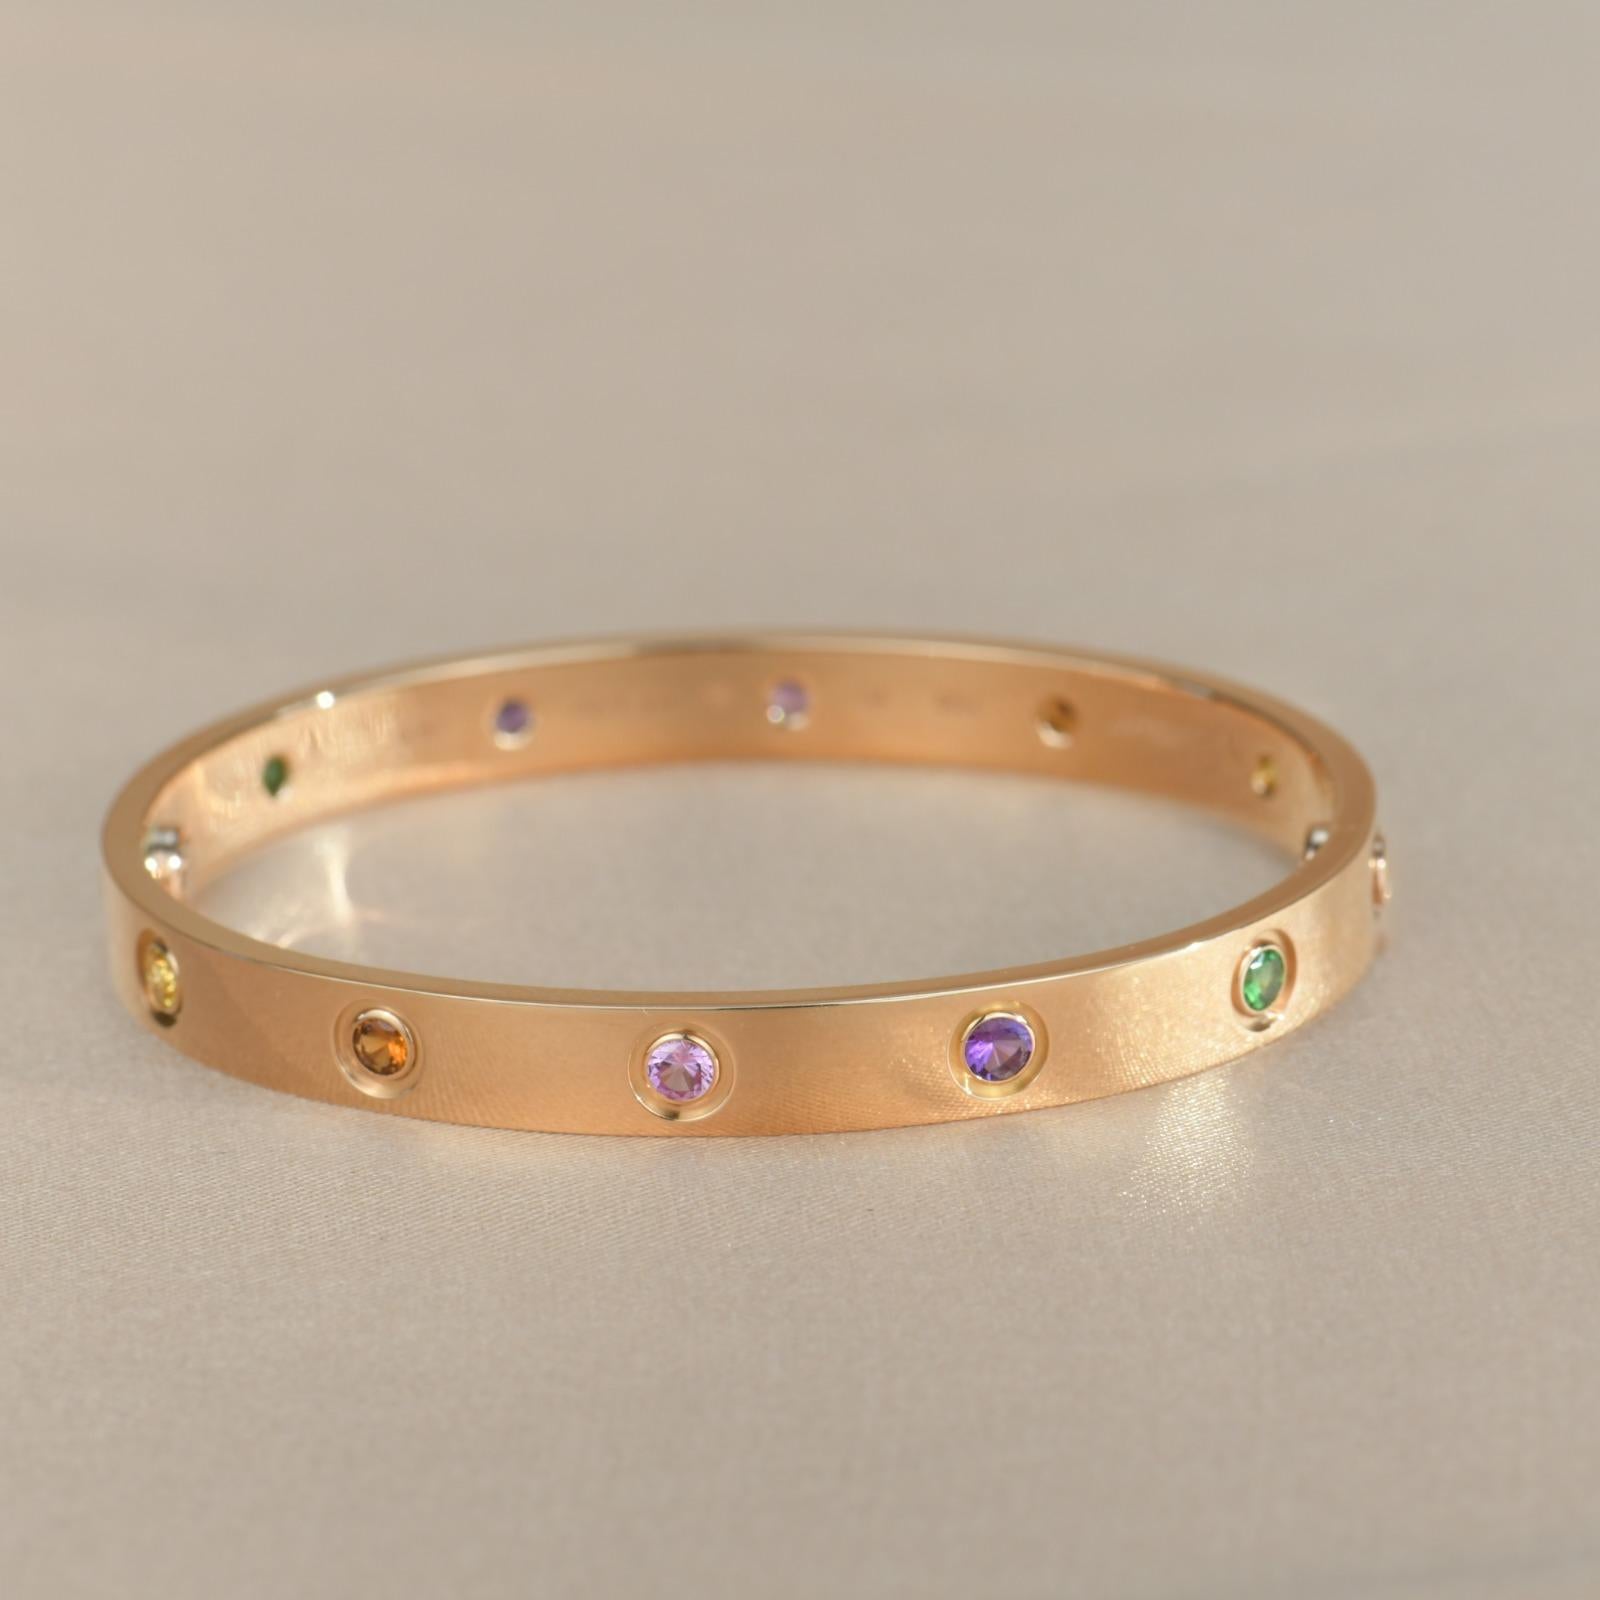 LOVE bracelet, 18K rose gold, set with 2 pink sapphires, 2 yellow sapphires, 2 green garnets, 2 orange garnets, and 2 amethysts. 
Comes with Cartier Box / Authentic card. Size 16
__________________________________

Dandelion Antiques Code